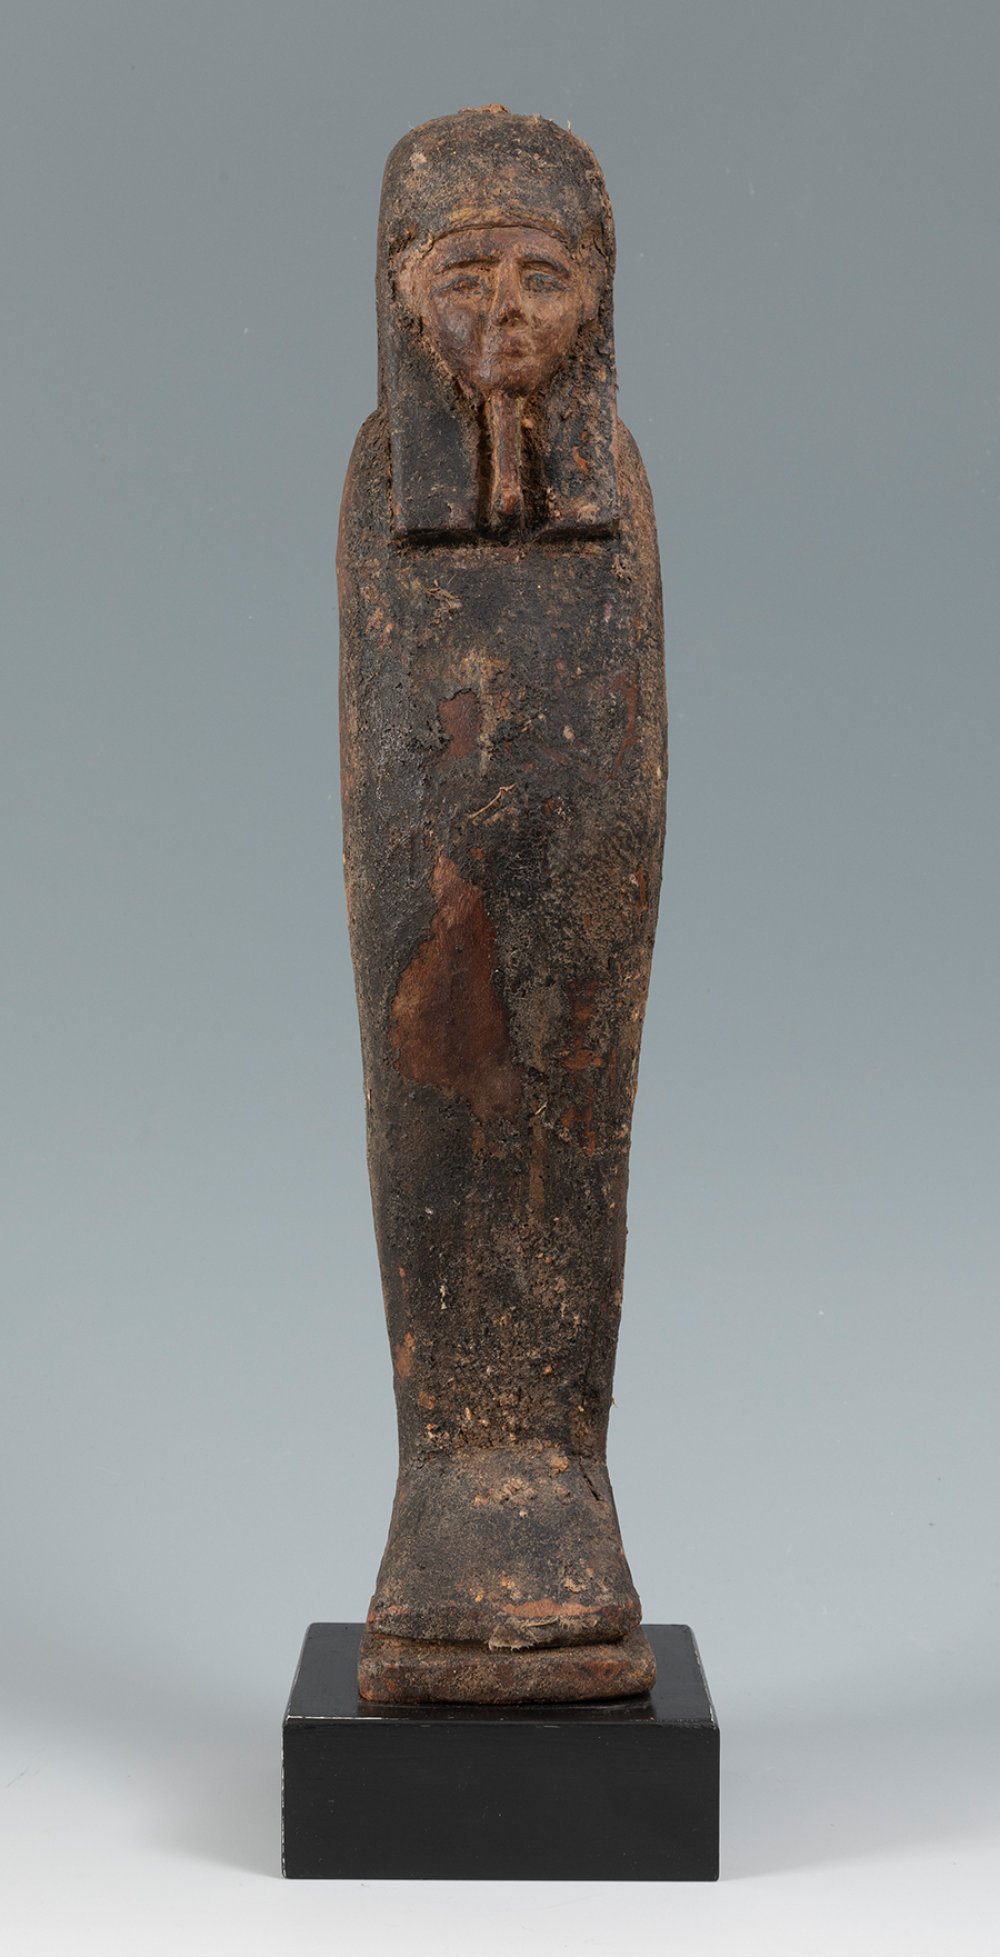 Ptah-Sokar-Osiris. Egypt, Ptolemaic Period, 3rd-1st century BC.Carved and polychromed wood. - Image 5 of 5